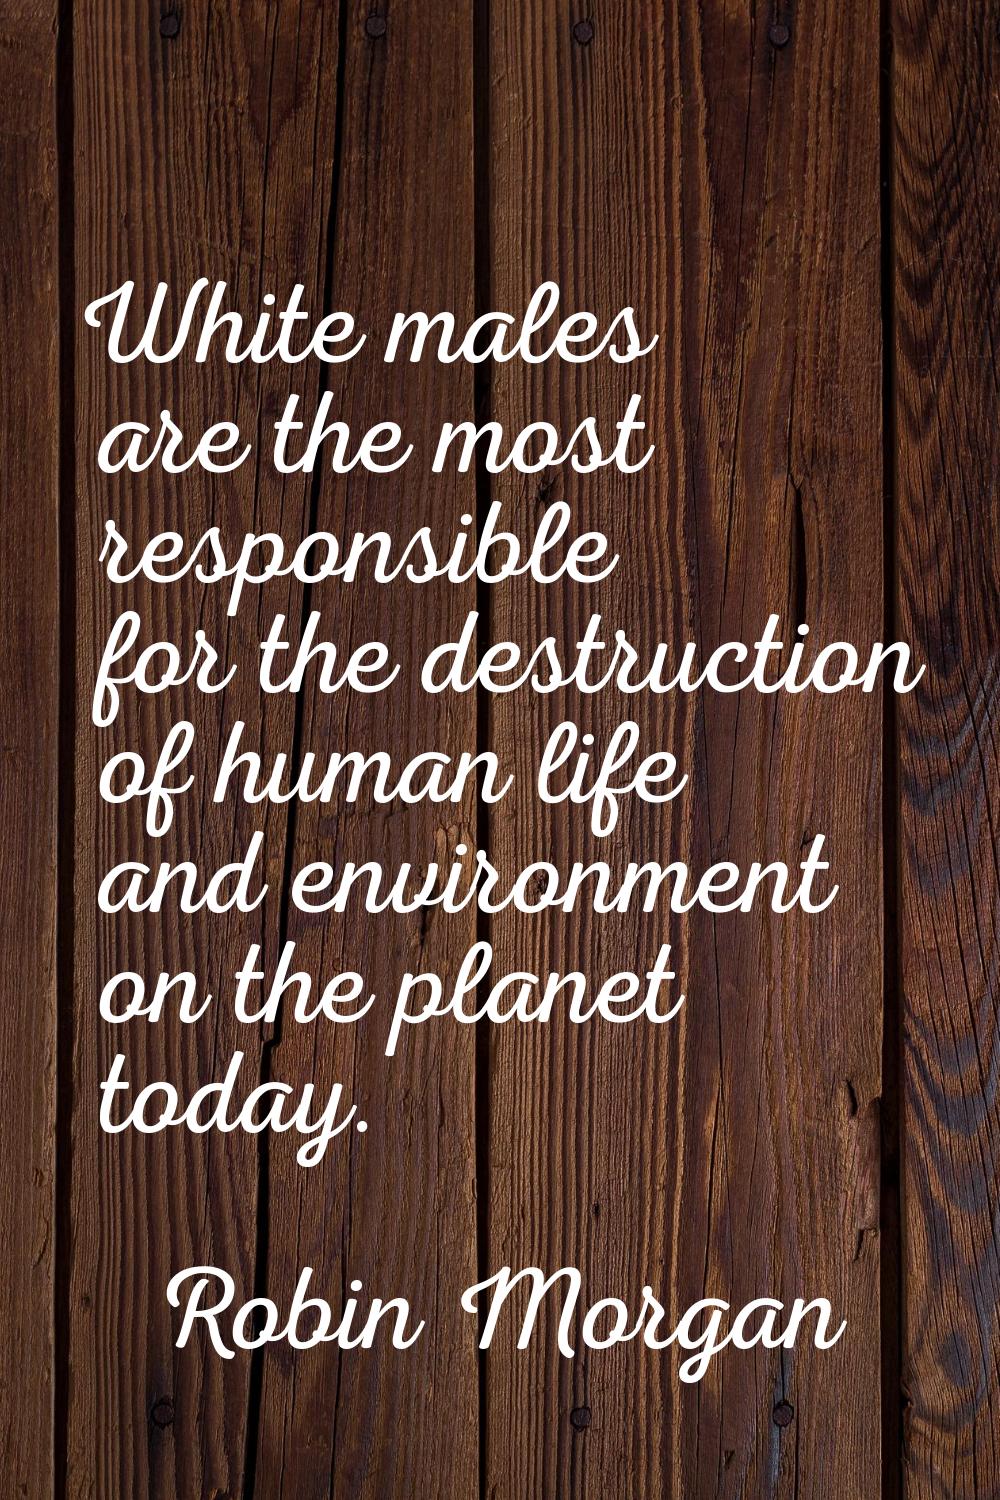 White males are the most responsible for the destruction of human life and environment on the plane